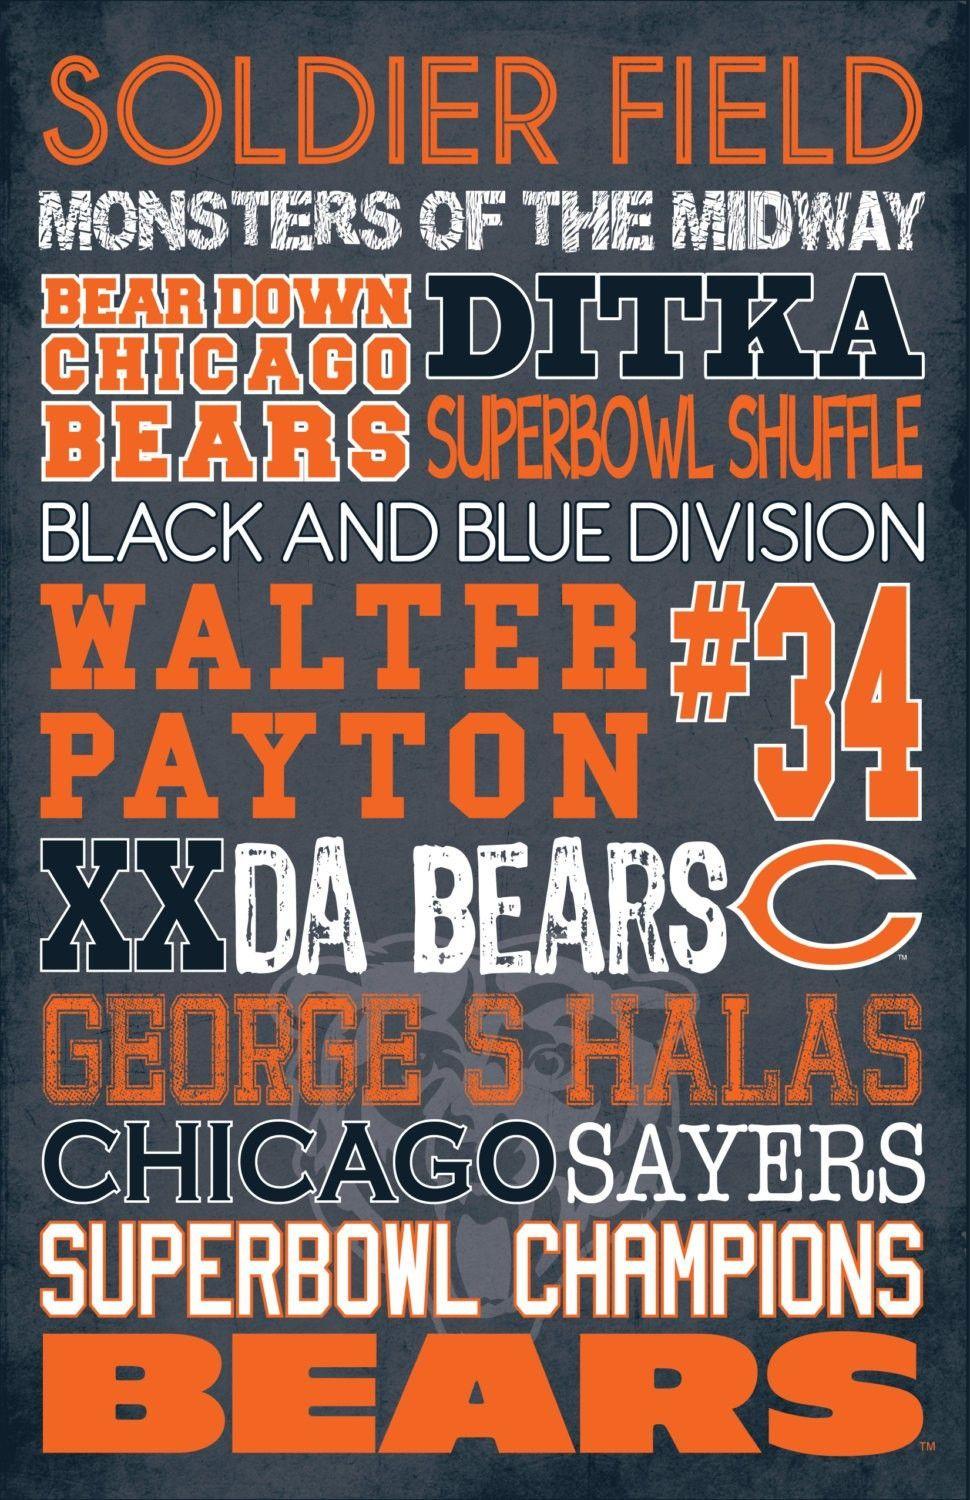 Perfect for all: nfl super bowl chicago bears 2015 from chicago